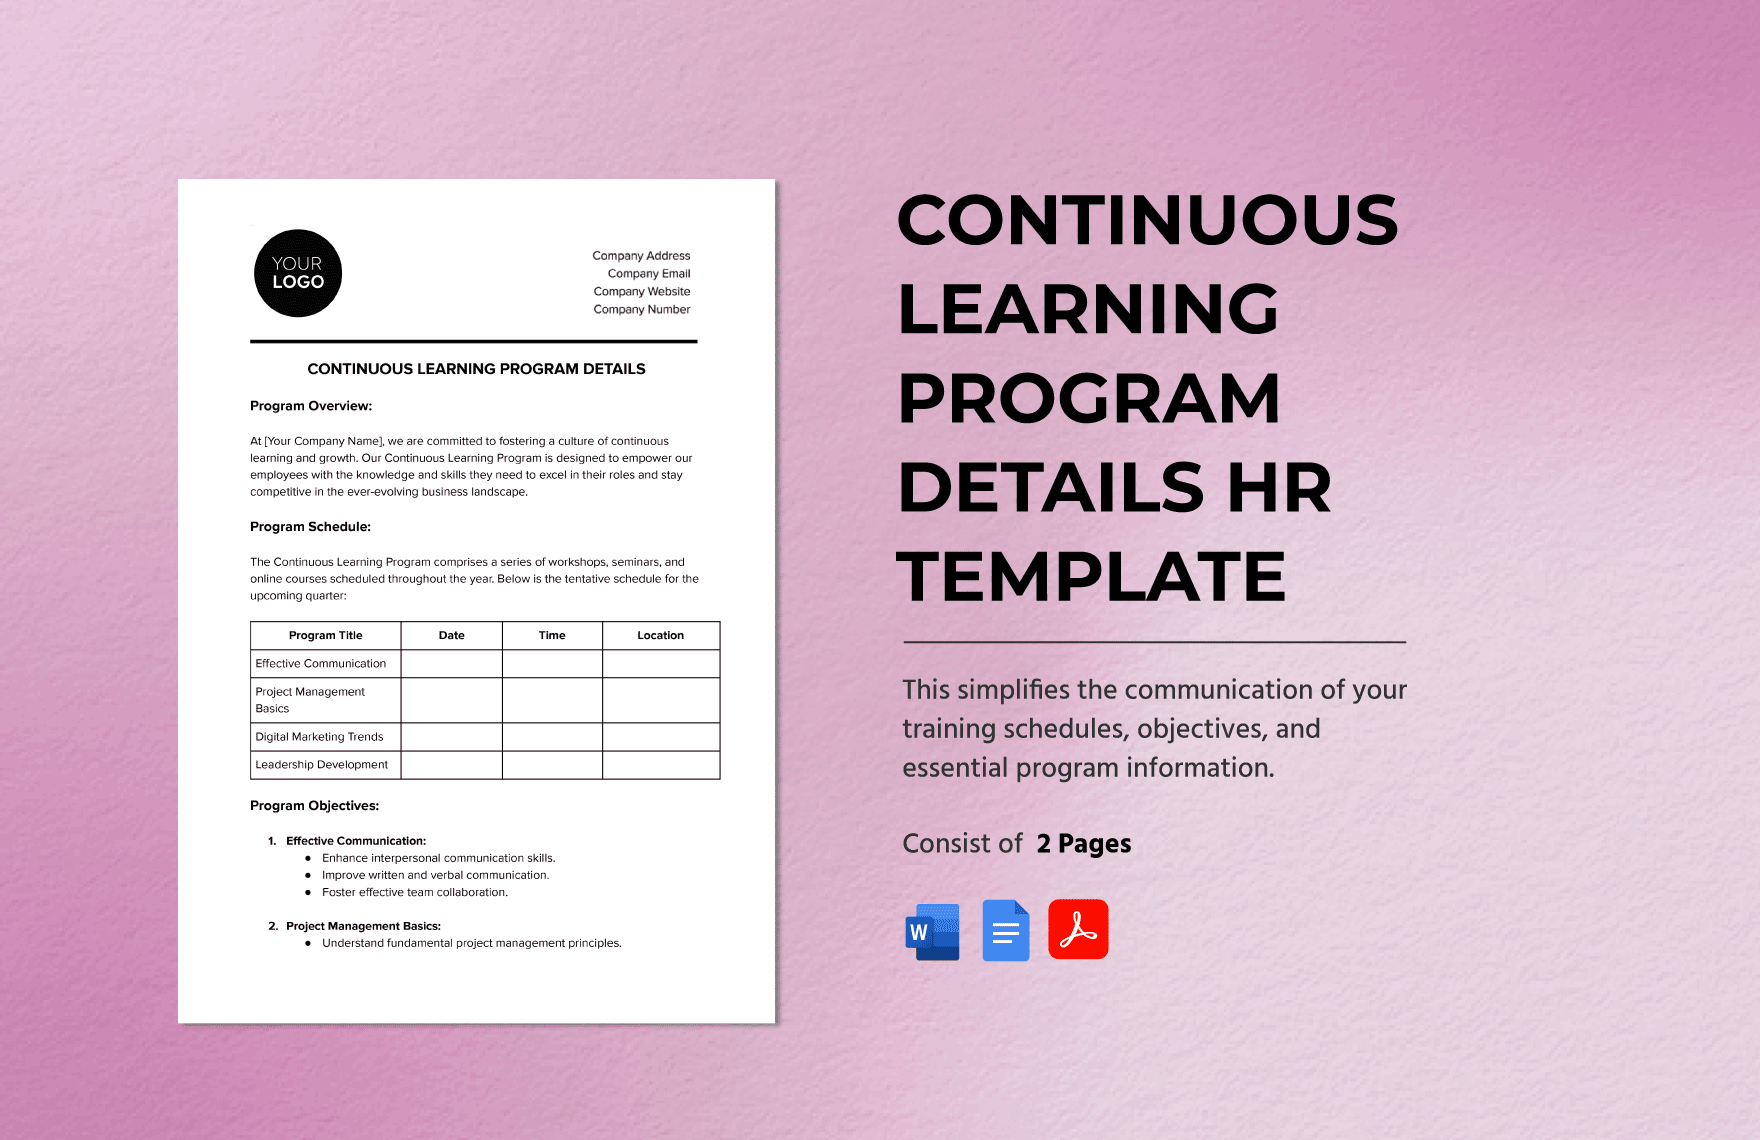 Continuous Learning Program Details HR Template in Word, Google Docs, PDF